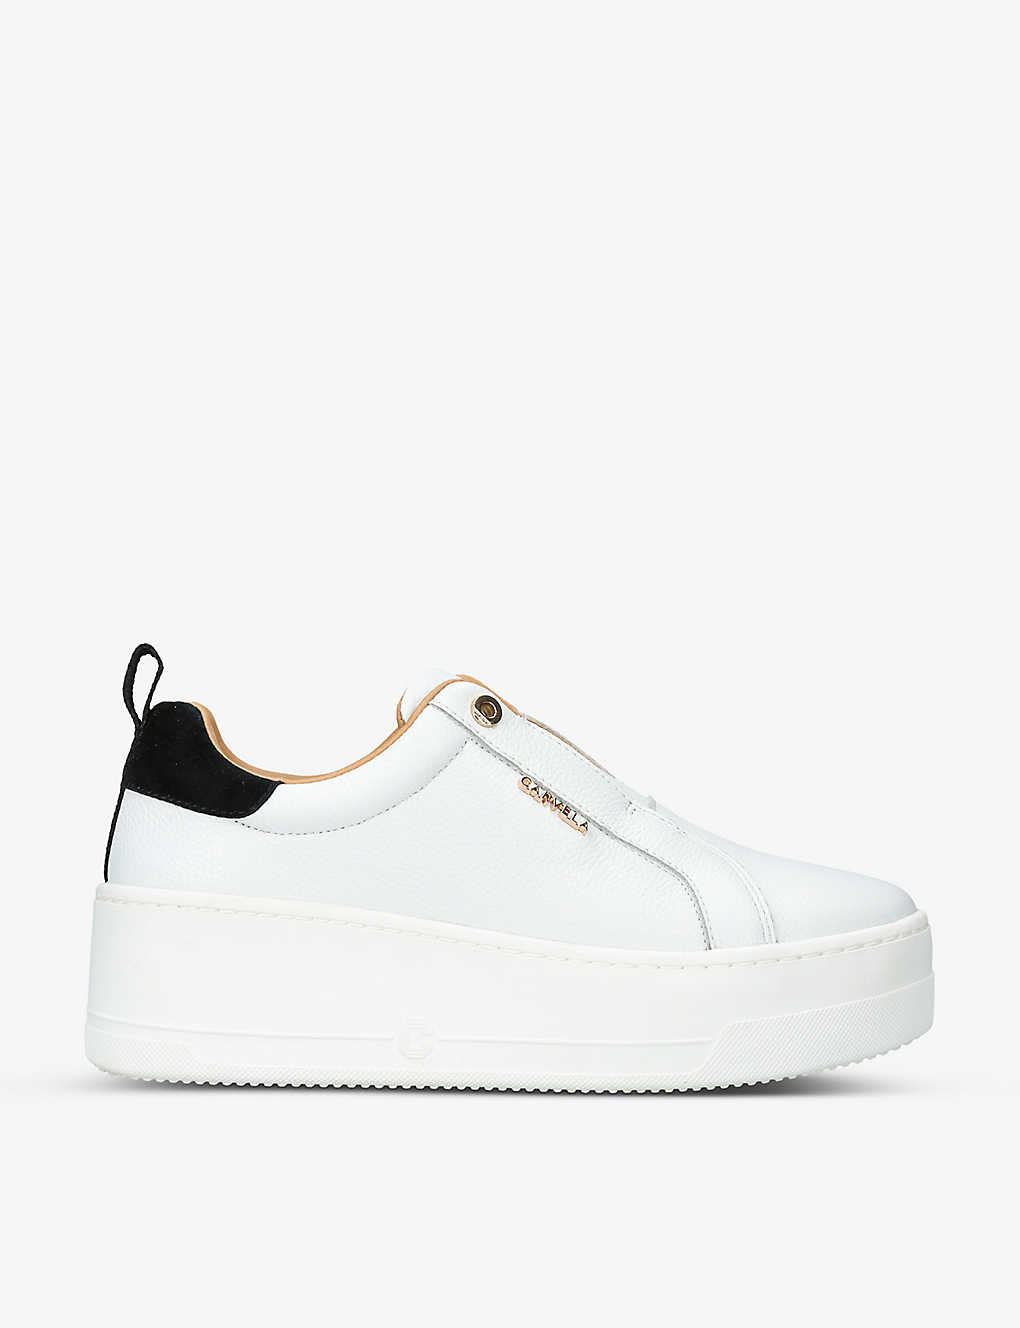 Carvela Womens White Connected Slips-on Leather Flatofrm Trainers